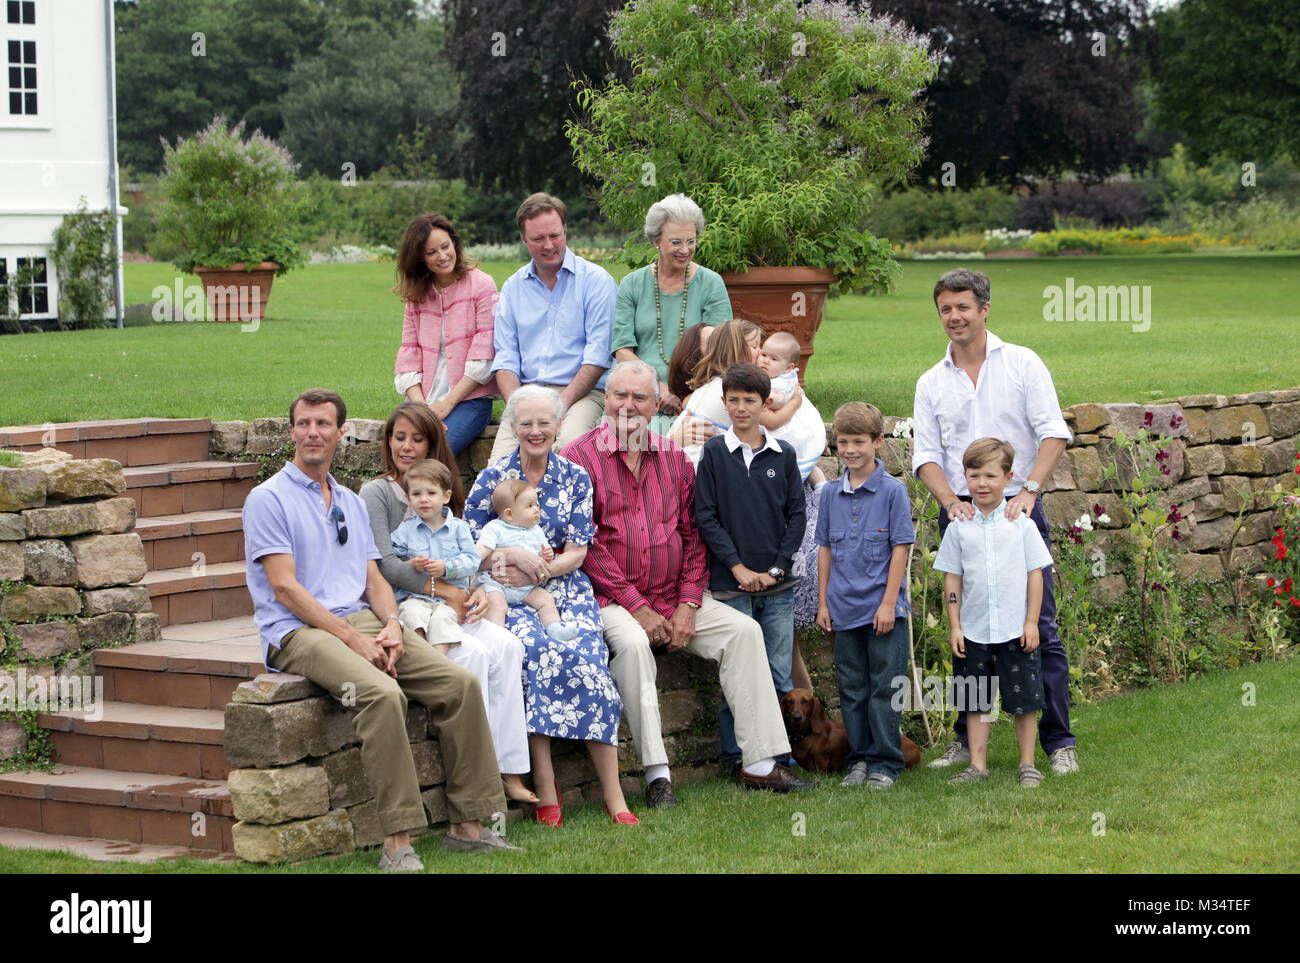 Grasten, Denmark. 1st Aug, 2011. The Danish royal family Prince Joachim (L), Princess Marie (2nd L) with Prince Henrik, (back, L-R) Carina Axelsson and partner Prince Gustav with Princess Benedikte and Crown Prince Frederik (R) with son Prince Christian, Queen Margrethe (4th L) with Prince Vincent, Prince Consort Henrik (C), Prince Nikolai (4th R) and Prince Felix (3rd R), Crown Princess Mary (hidden) with daughters Isabella and Josephine pose during the annual photo session at Graasten Palace in Grasten, Denmark, 1 August 2011. Credit: Albert Nieboer | usage worldwide/dpa/Alamy Live News Stock Photo